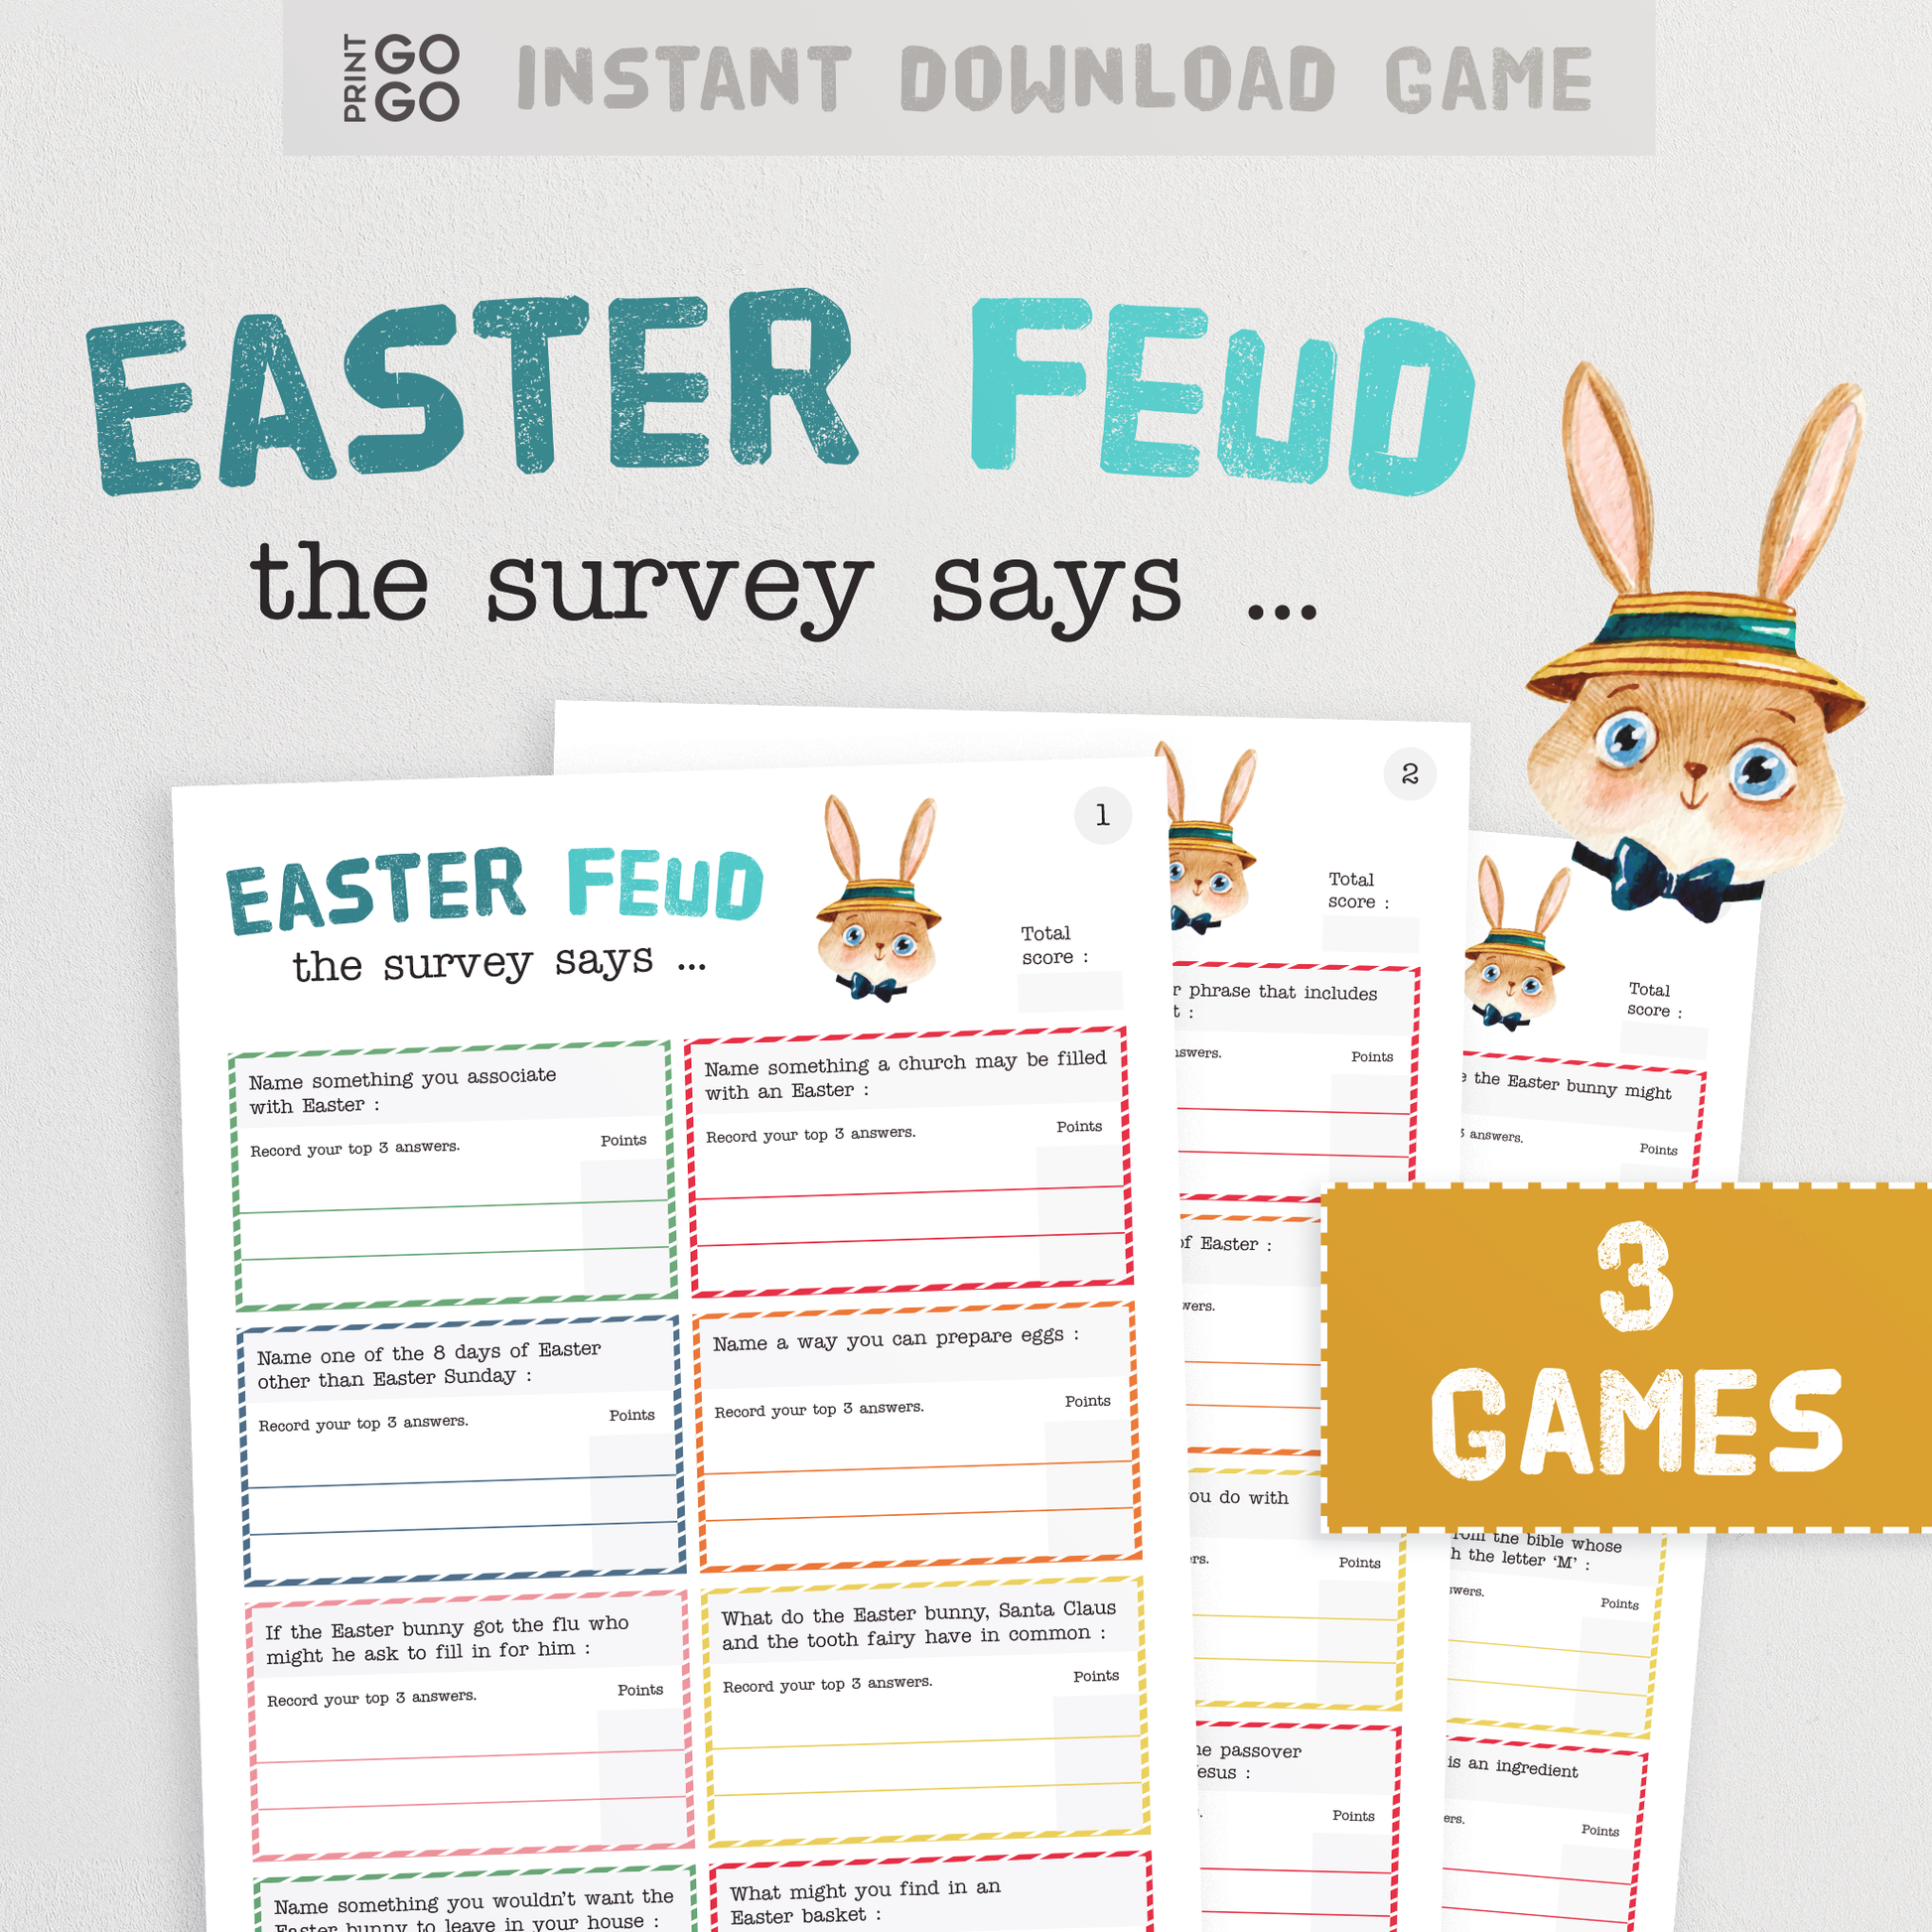 Easter Feud 'The Survey Says' - The Fun Game of Matching Answers and Scoring Points